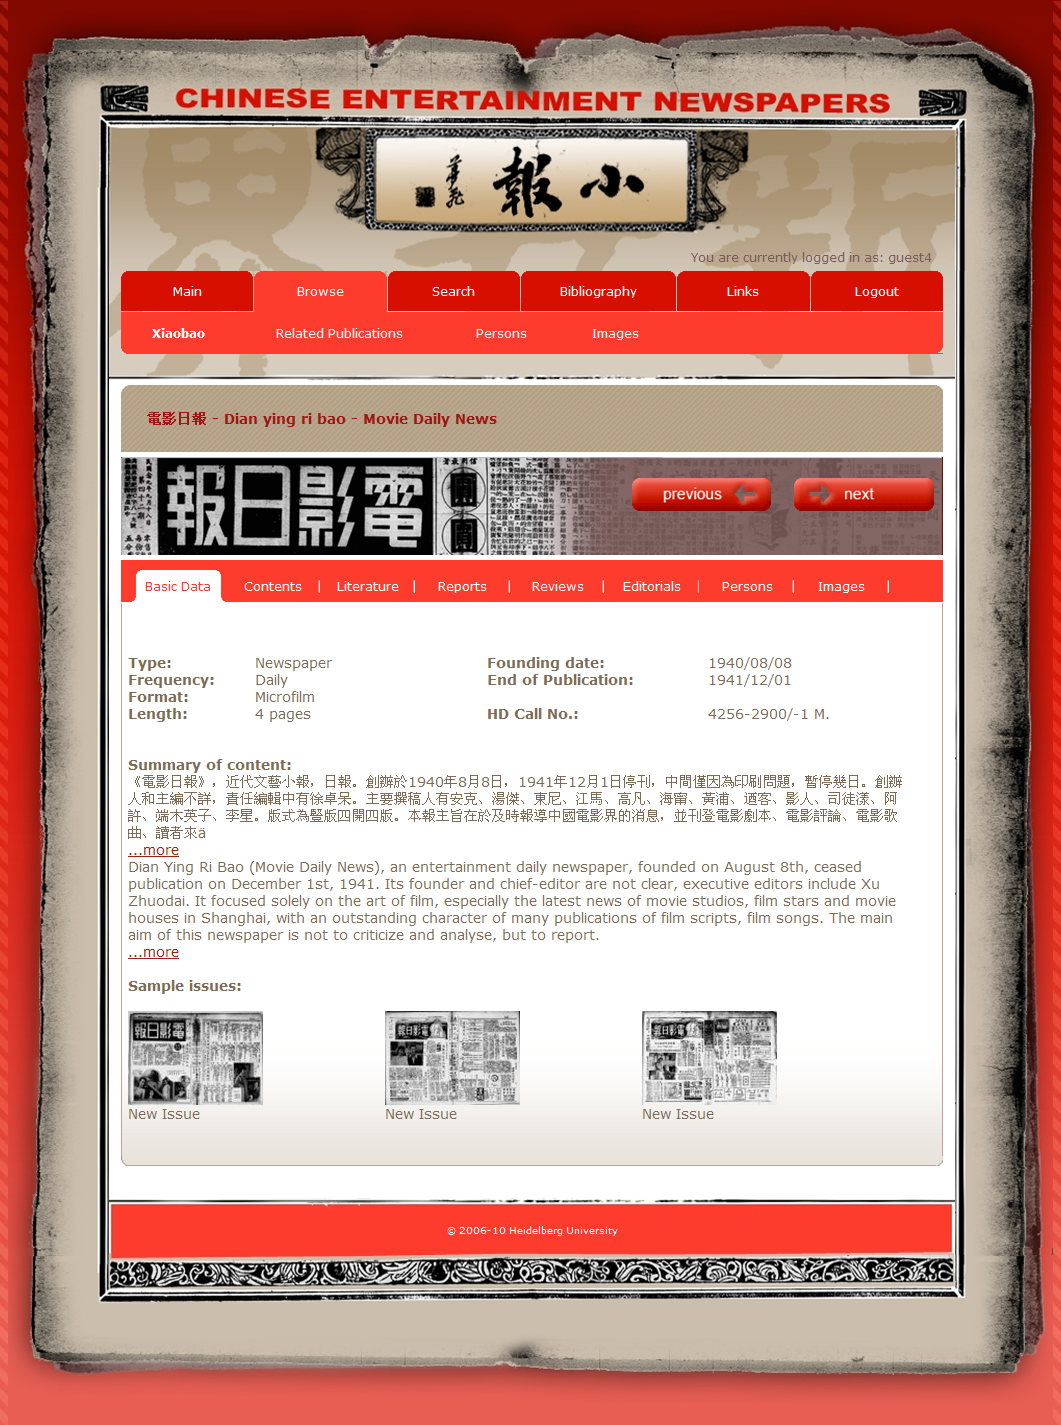 Chinese Entertainment Newspapers – Browsing the list of xiaobao newspapers.